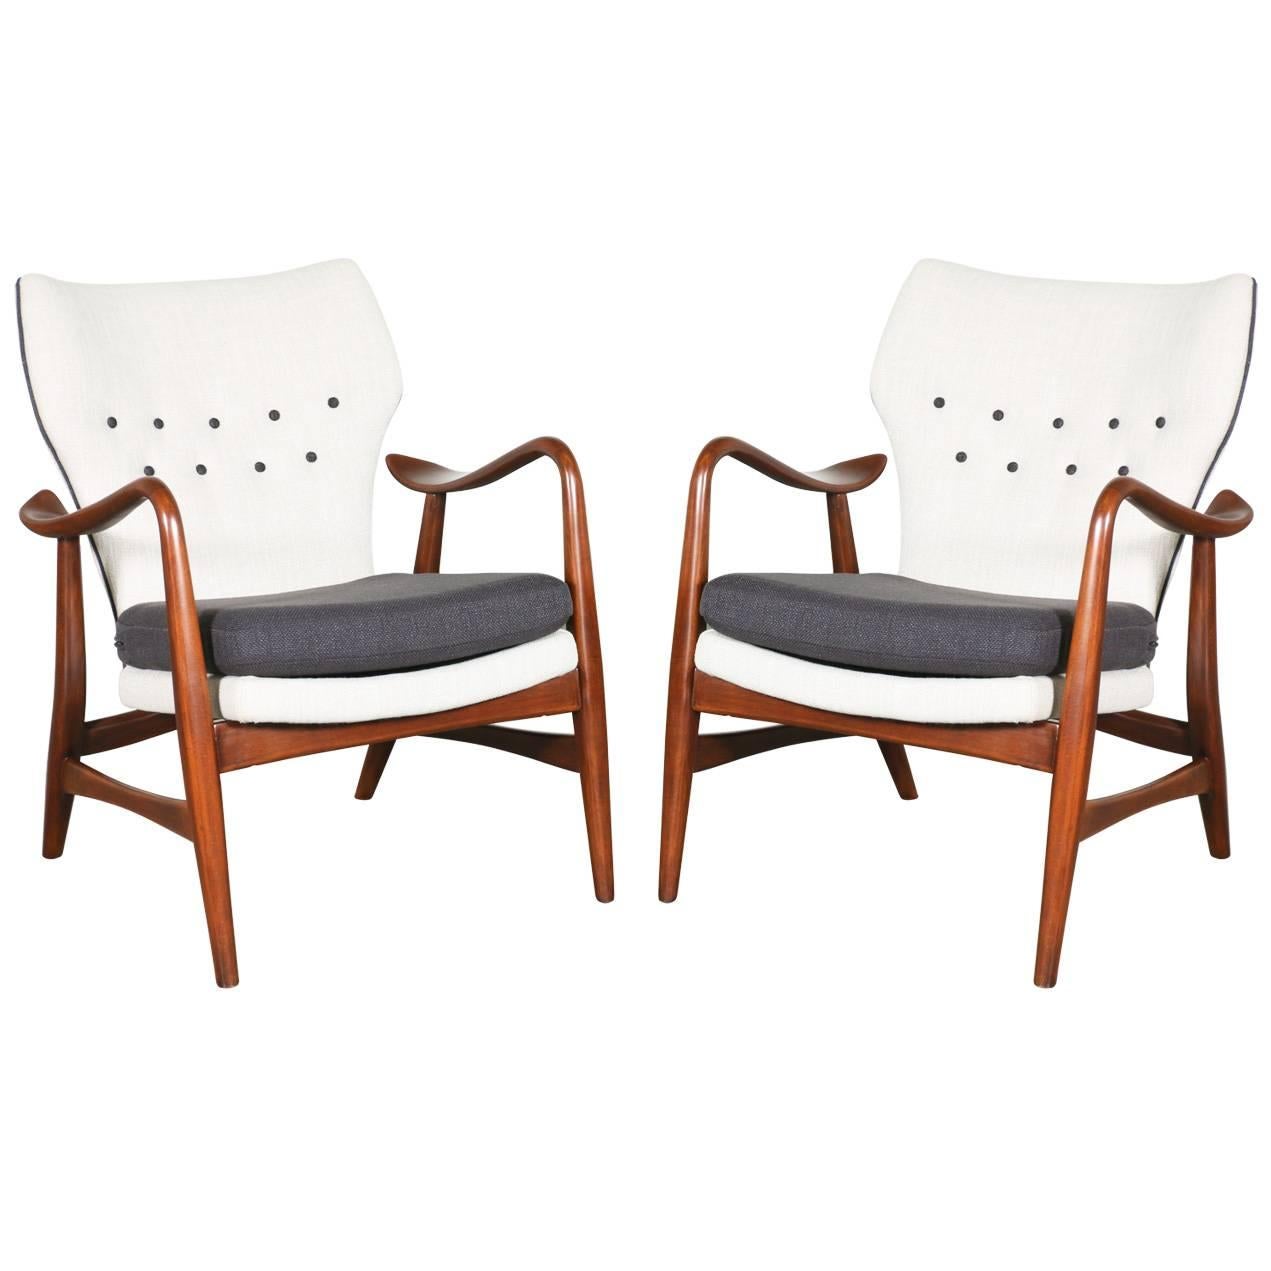 Rare IB Madsen and Acton Schubell Wingback Armchairs